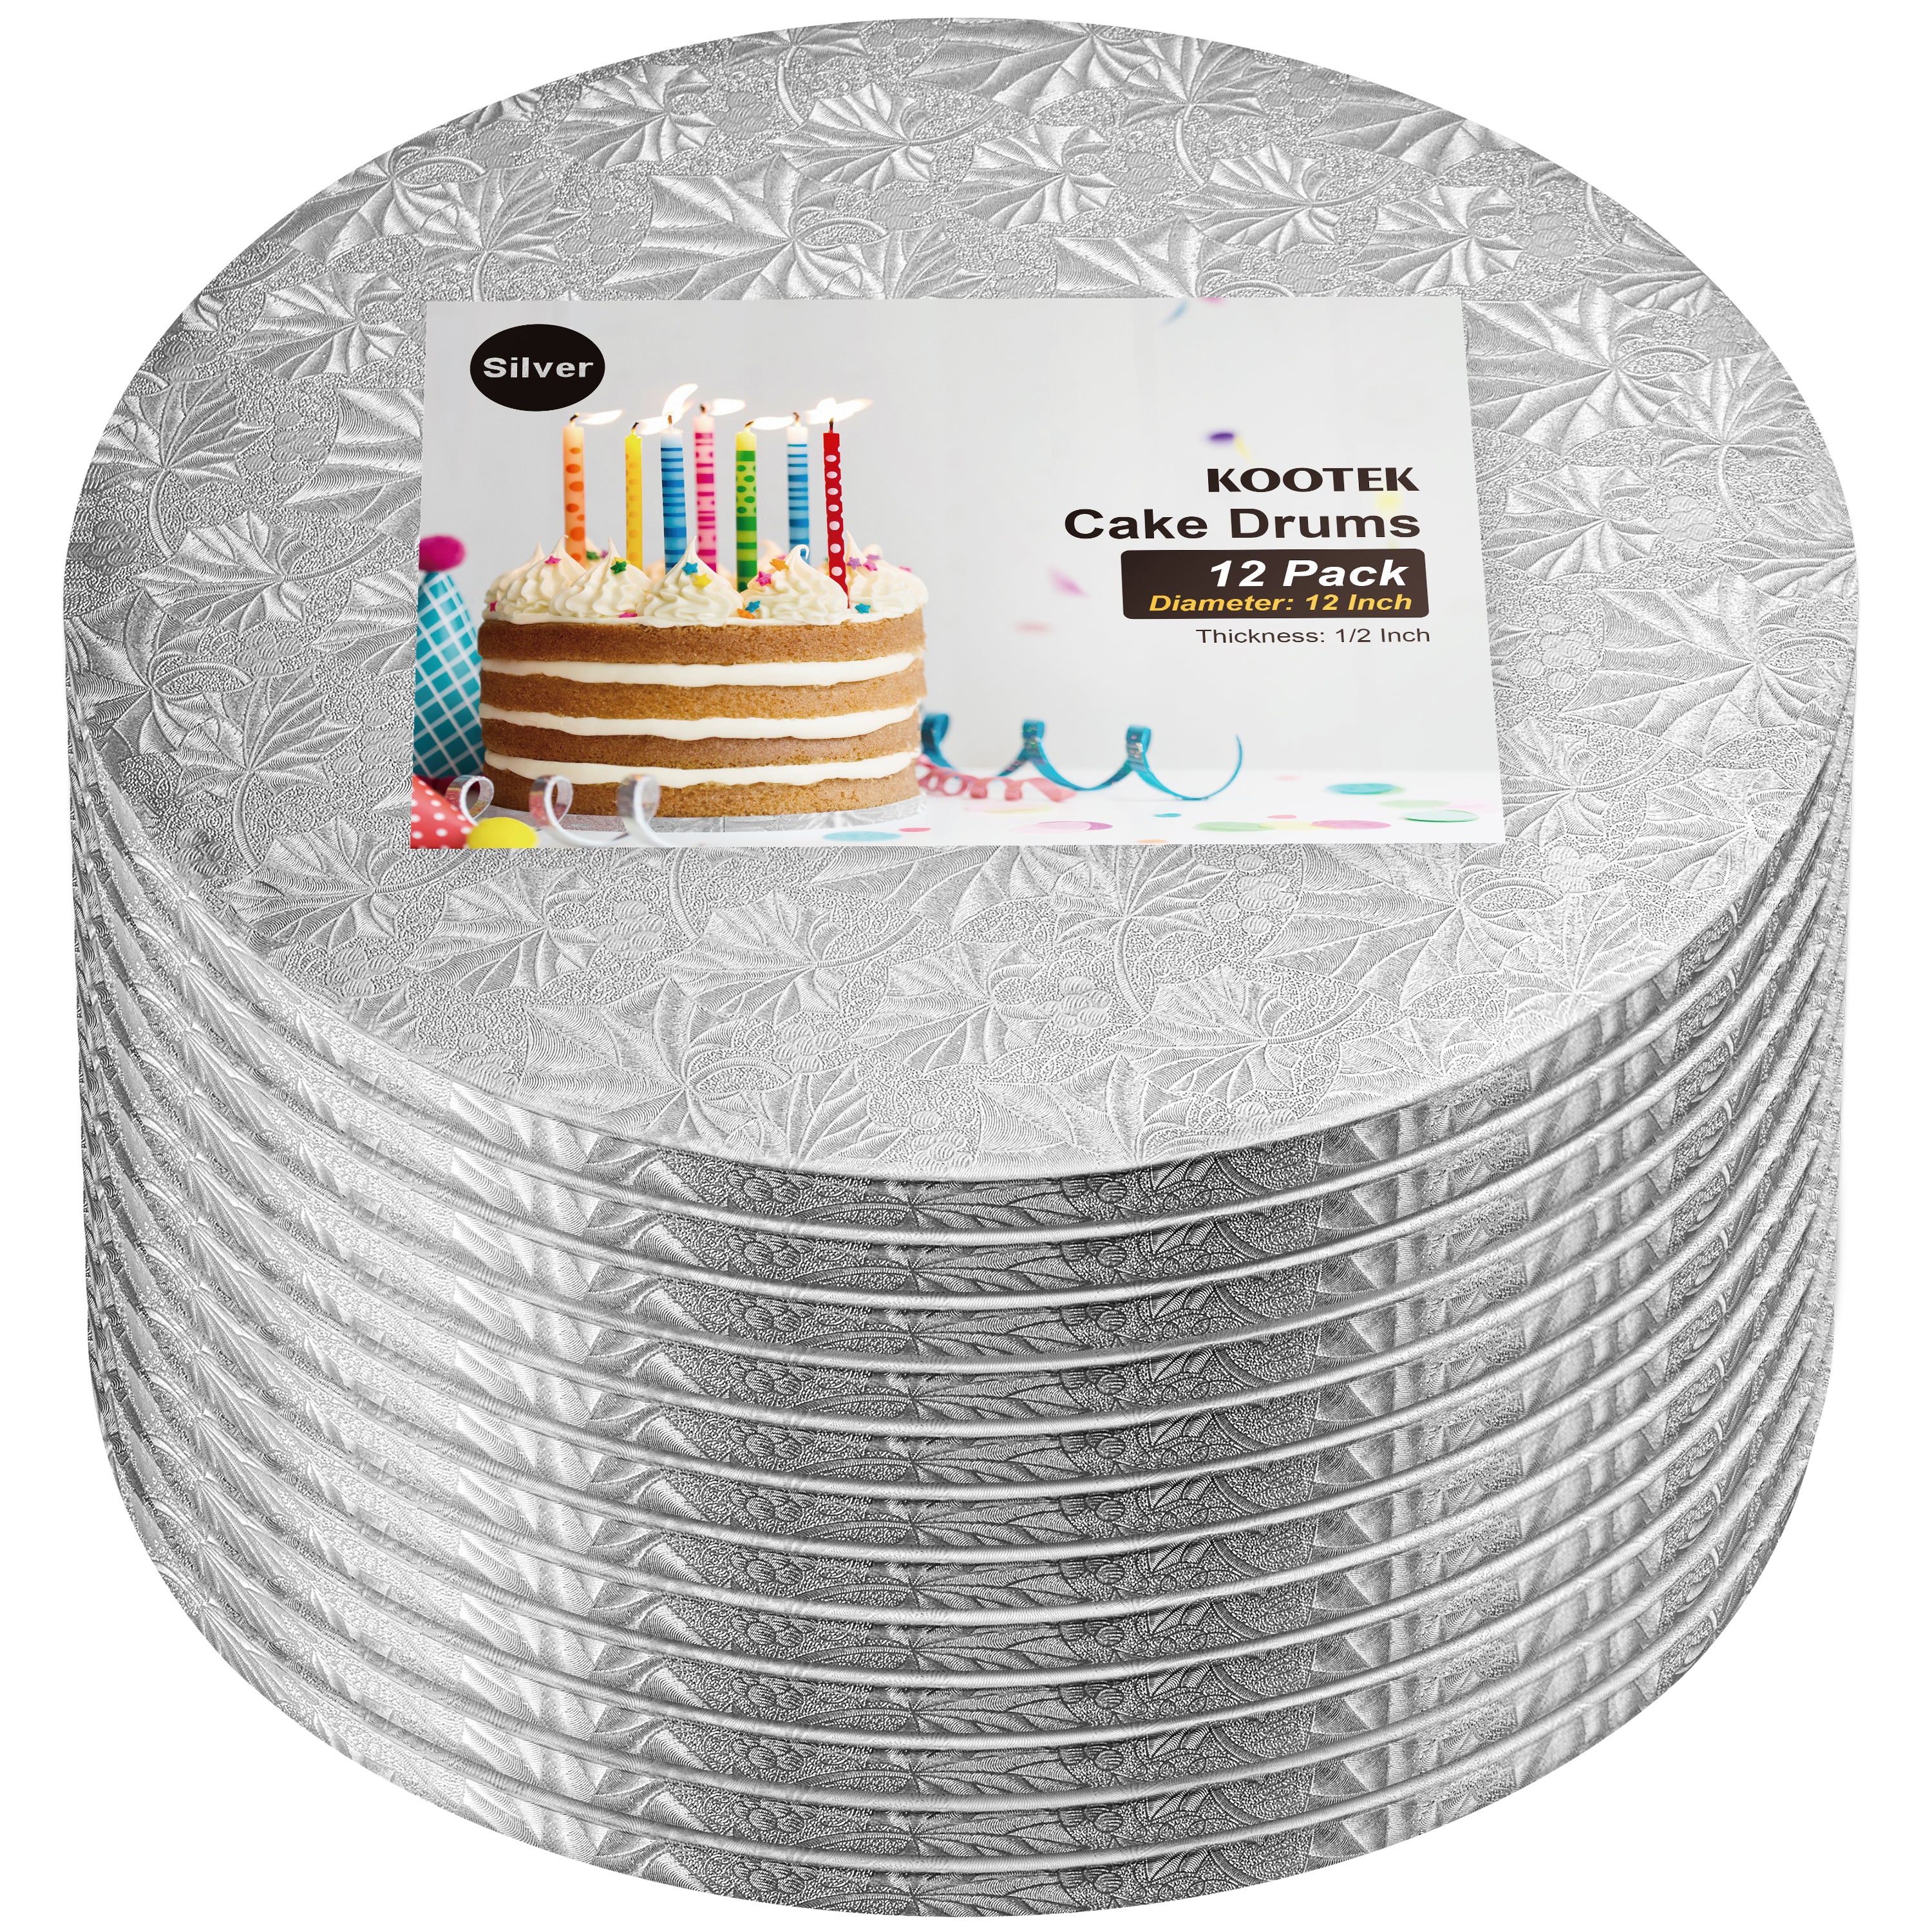 Kootek Cake Boards Drums 12 Inch Round, 1/2" Thick Cake Drums, Cake Decorating Supplies Sturdy Cake Corrugated Cardboard for Multi-Layer Cakes (Silver, 12 Pack)